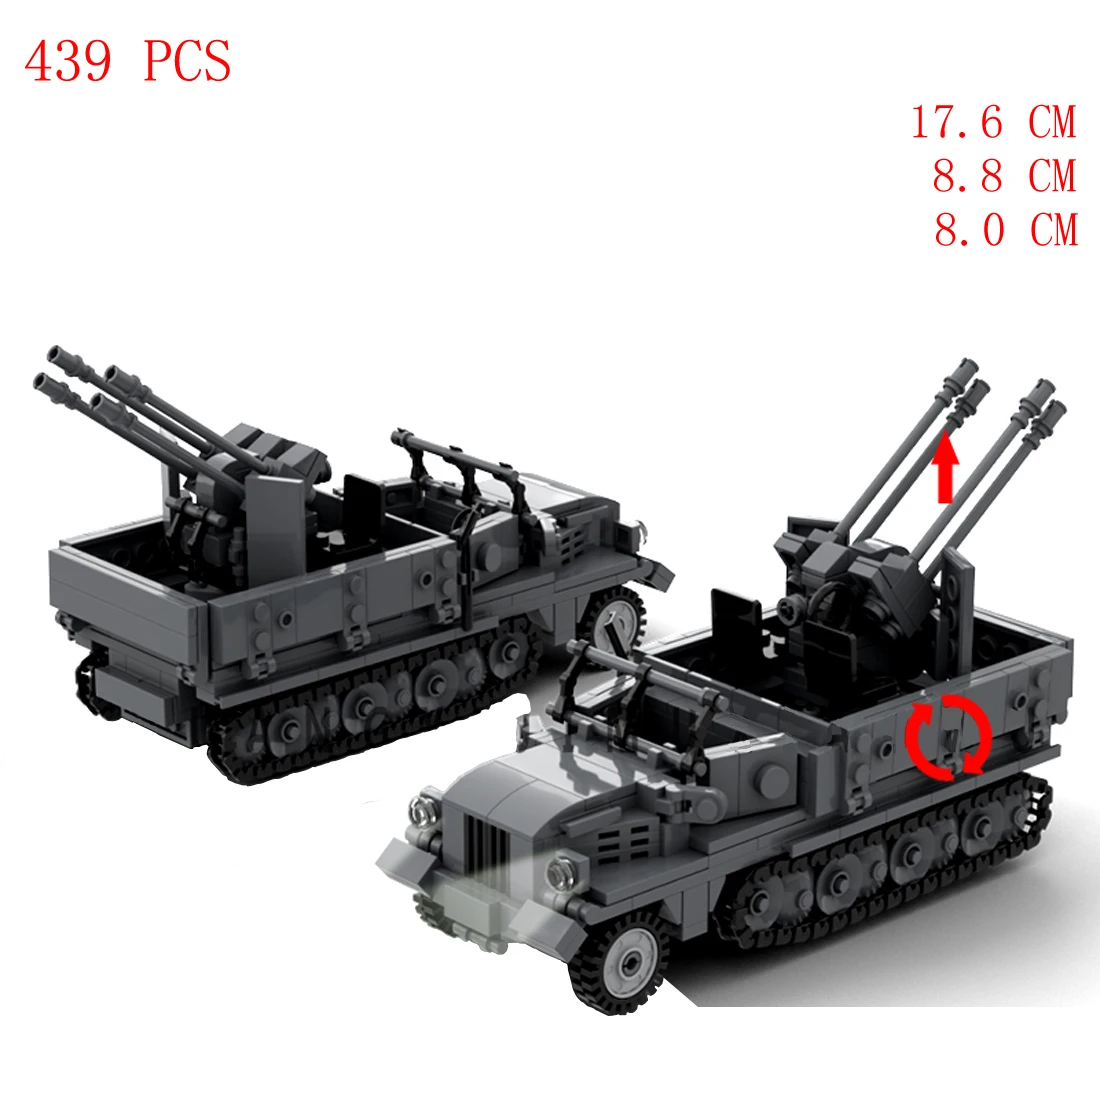 

hot military WWII Technology weapons equipment SDKFZ 11 vehicles army Lightning war model bricks moc Building Blocks toys gift